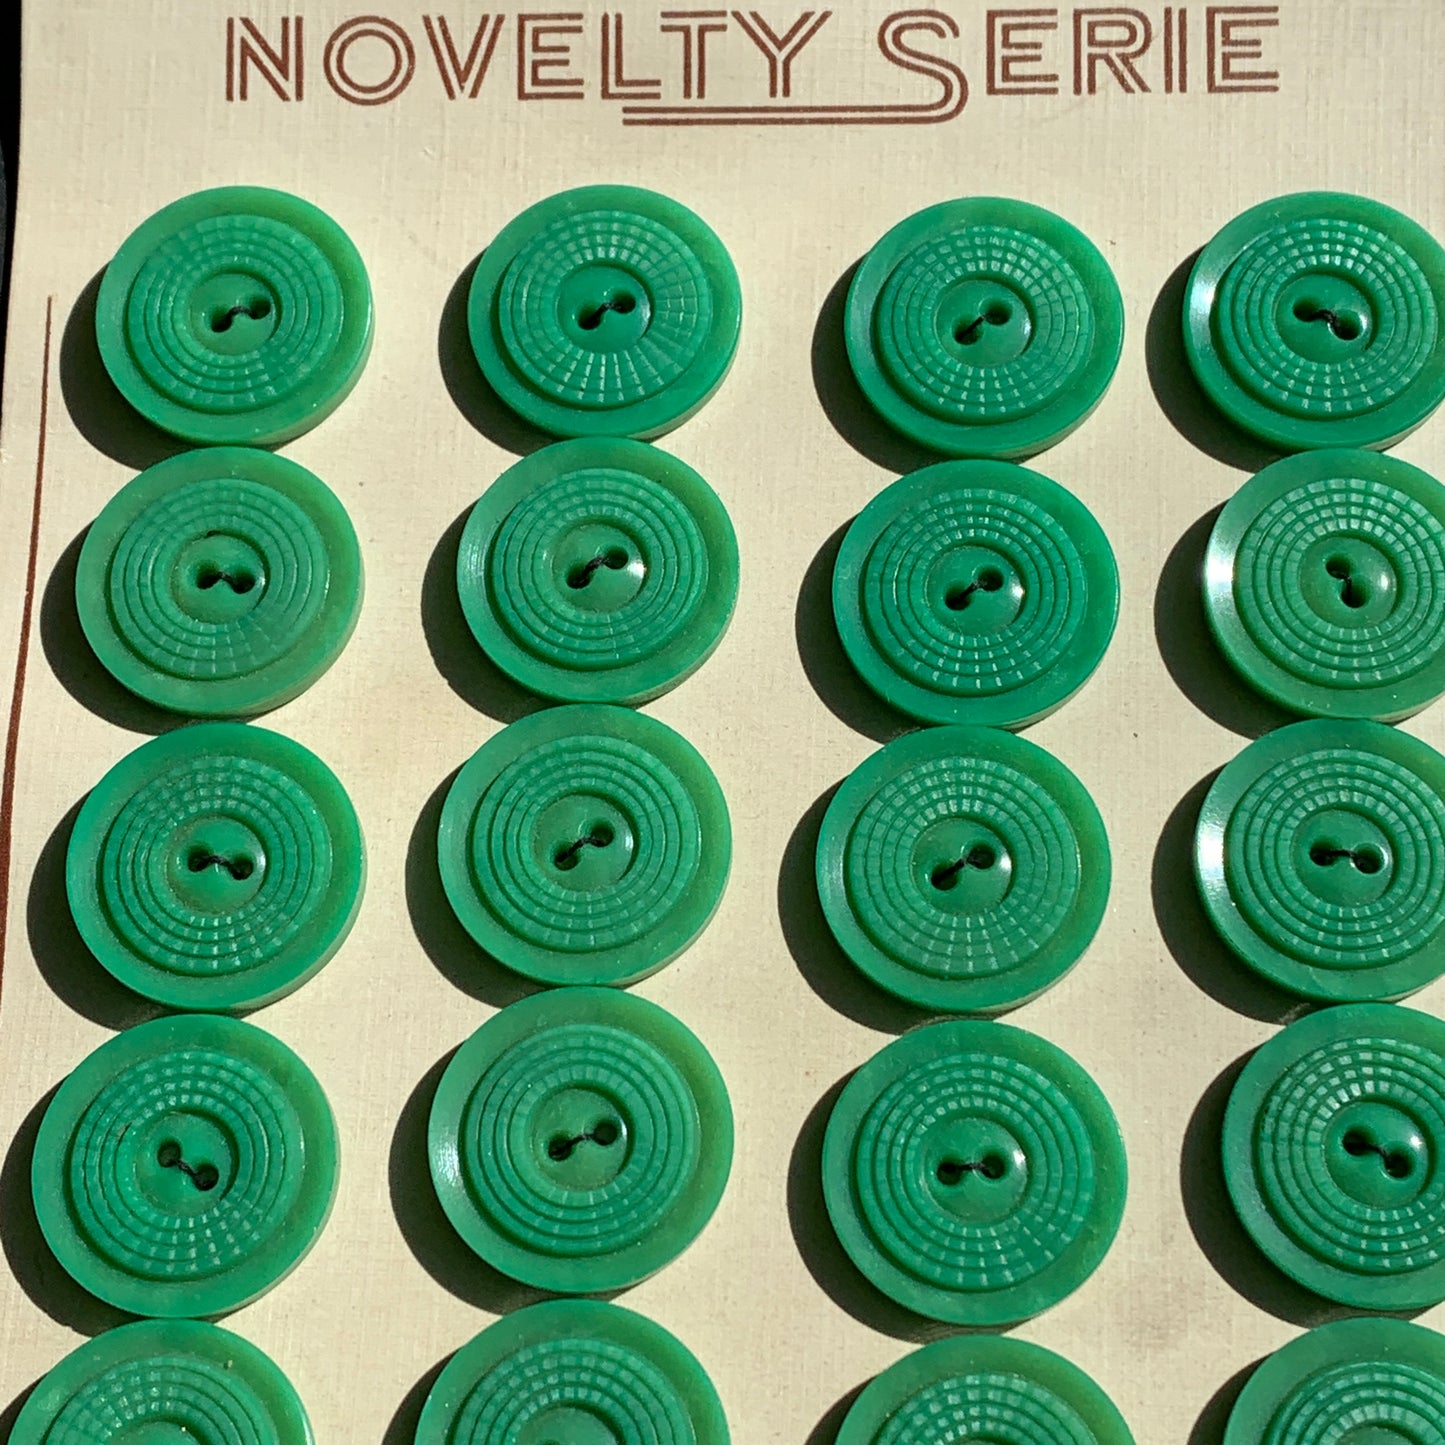 Jungle Green Vintage 2.2cm Buttons - 24 or 6